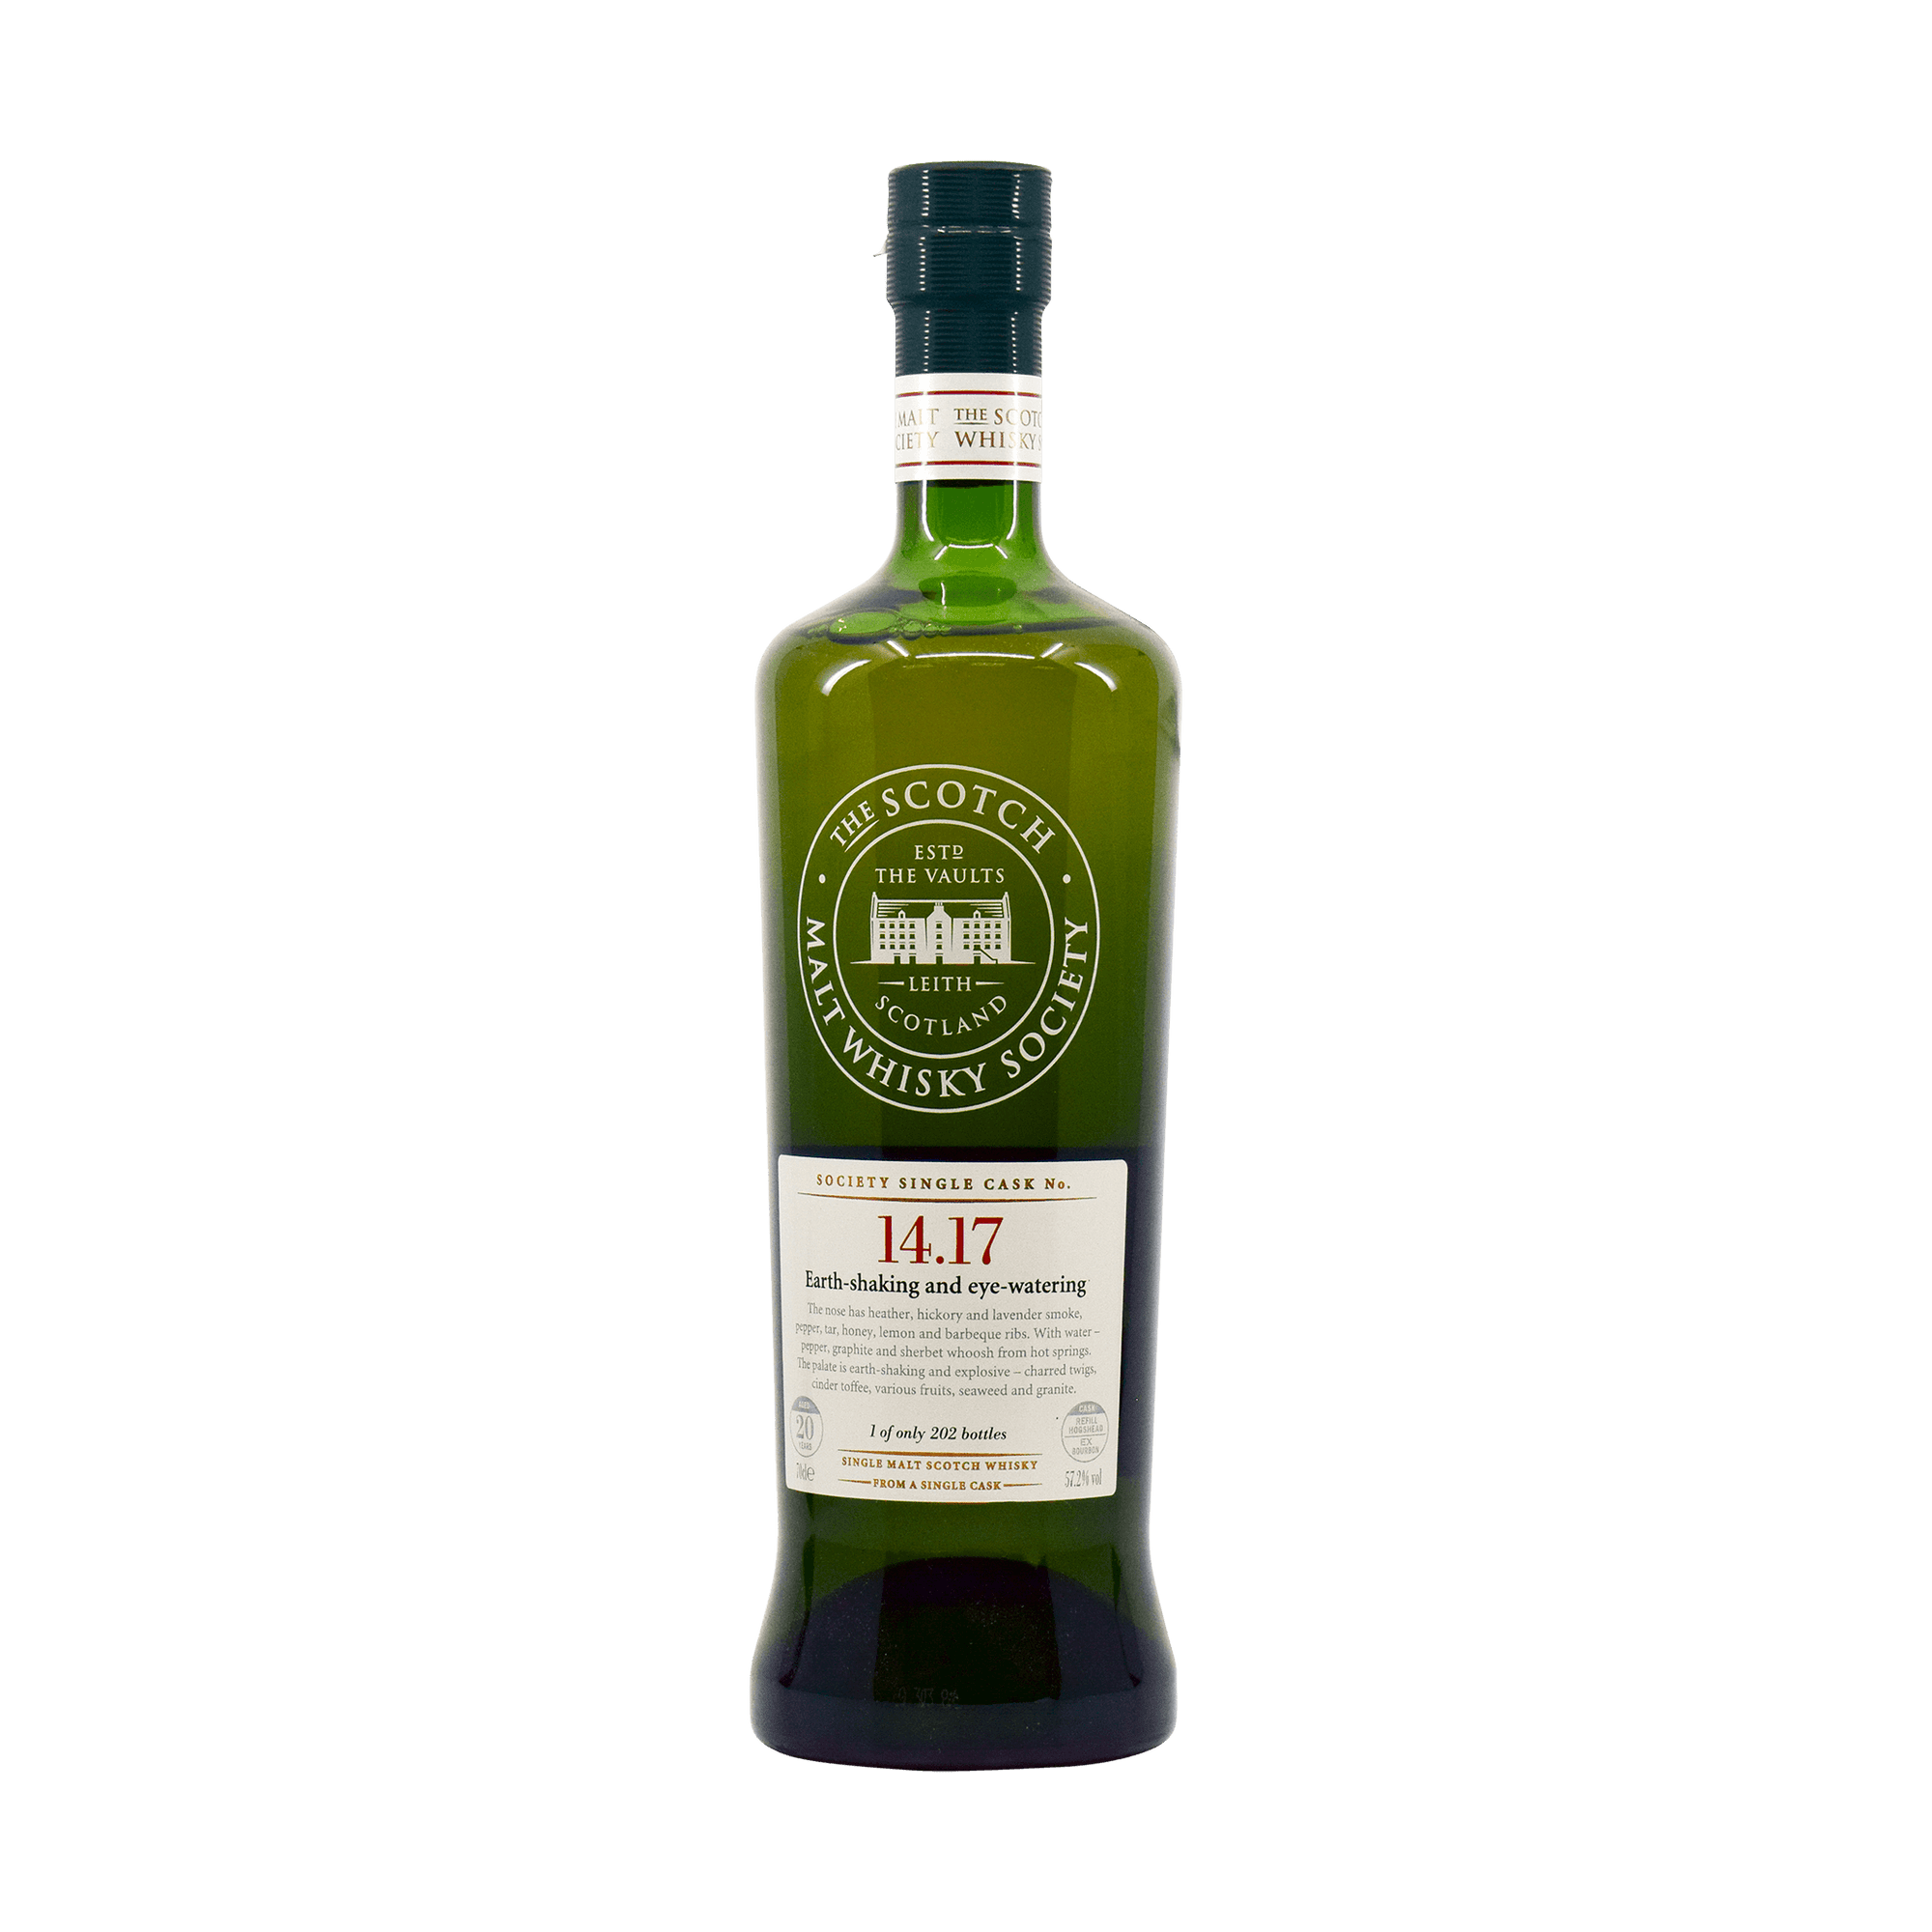 Talisker 1989 20 Year Old '14.17 – Earth Shaking and Eye Watering' SMWS 57.20% 70cl